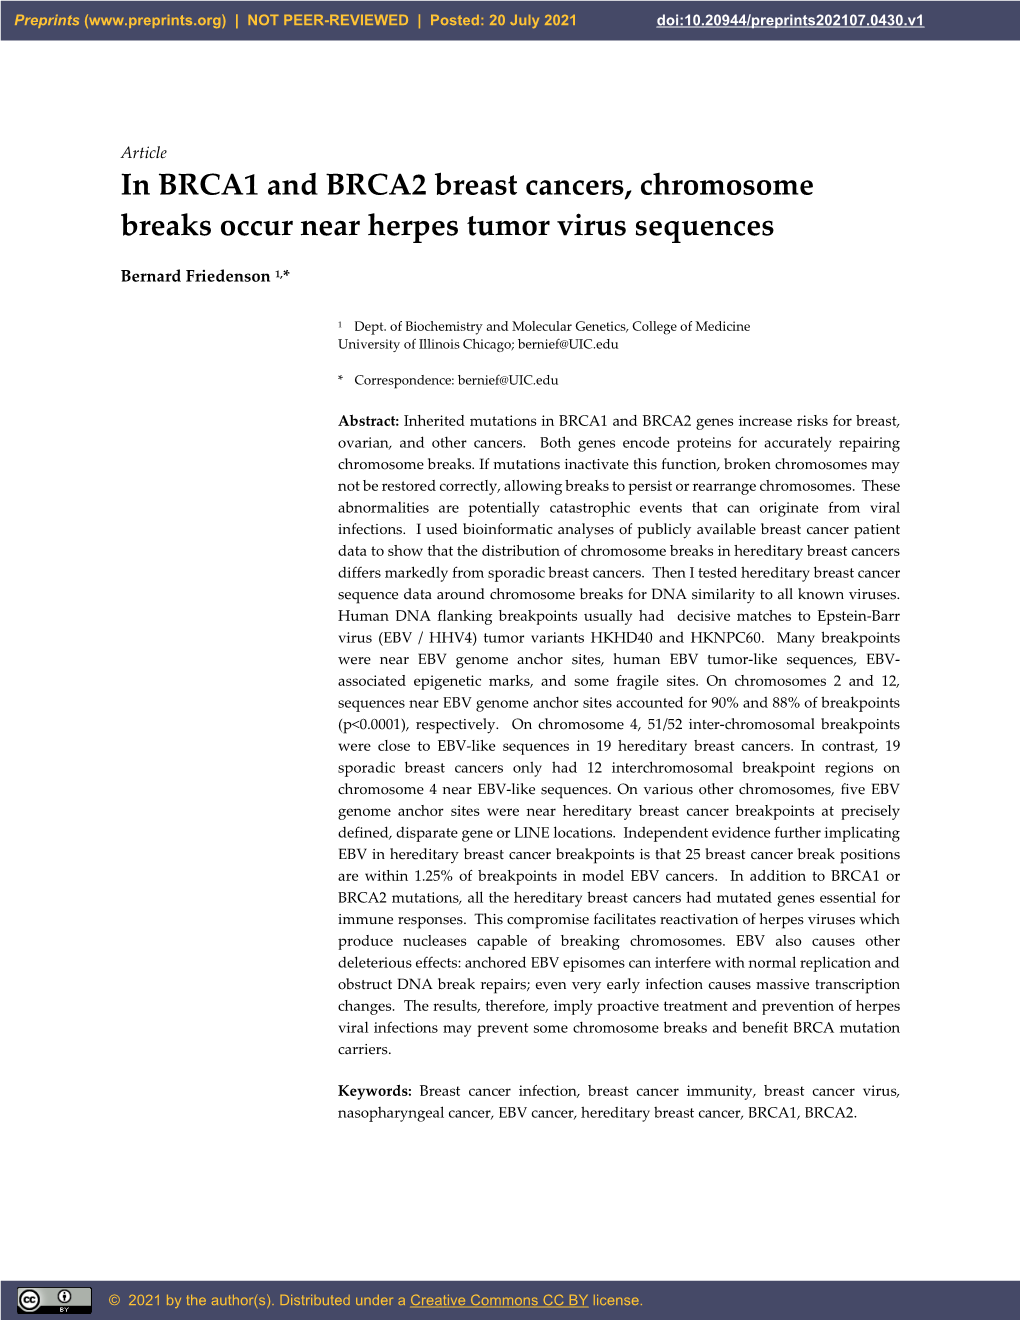 In BRCA1 and BRCA2 Breast Cancers, Chromosome Breaks Occur Near Herpes Tumor Virus Sequences